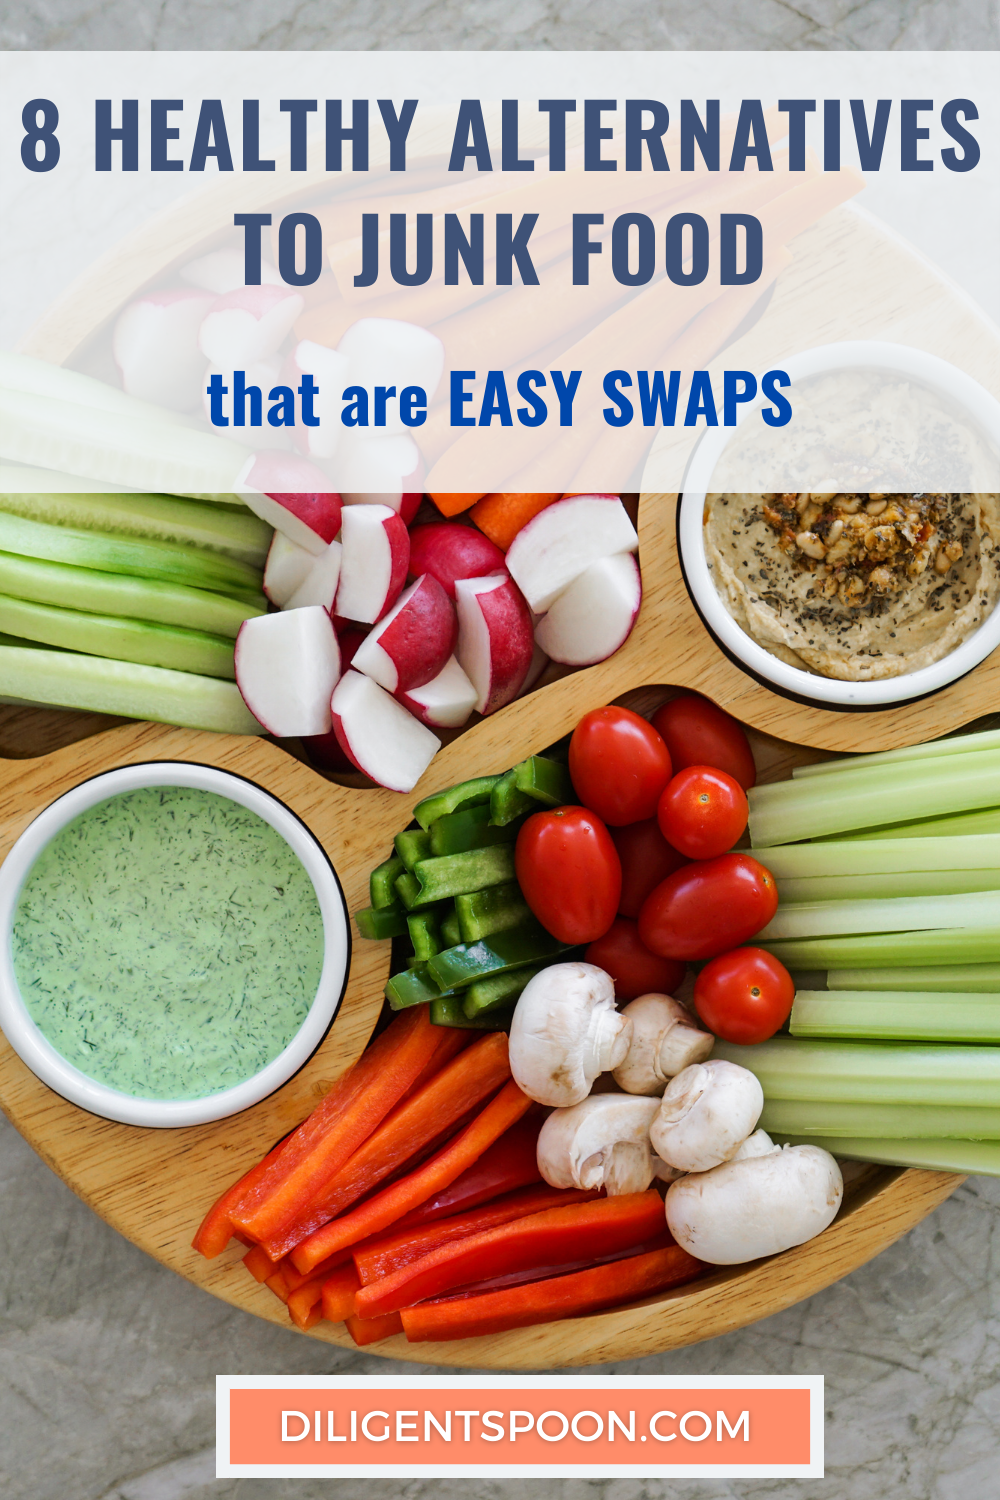 8 Healthy Alternatives to Junk Food That Are Easy Swaps